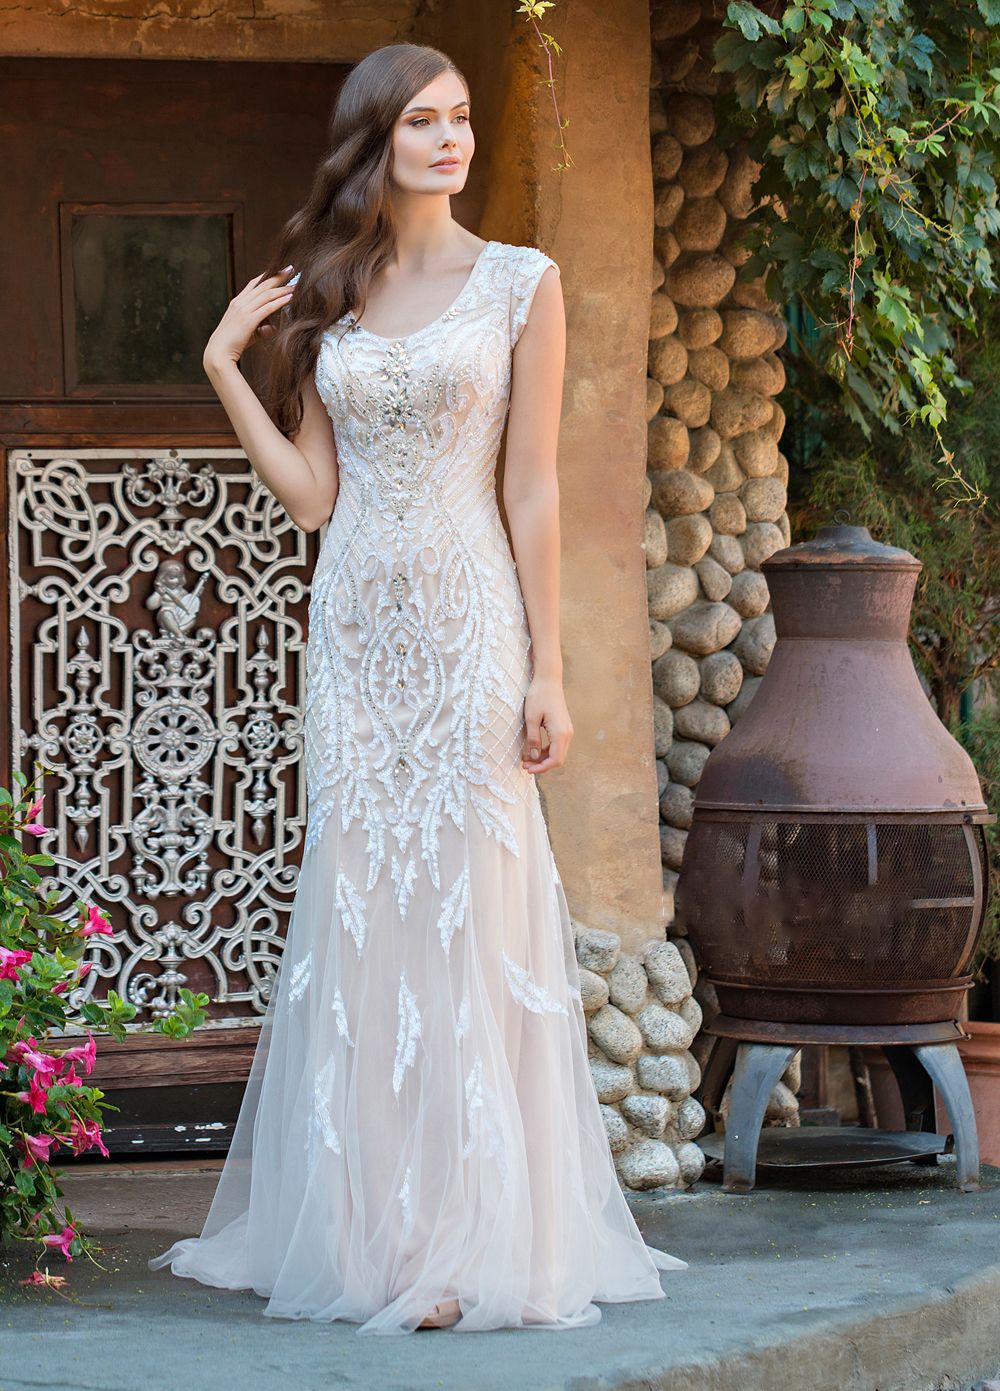 https://madamebridal.com/media/catalog/product/cache/83365d7c8fe98a8de86f2f82672e44c8/m/o/modest-bridal-by-mon-cheri-tr11837-fit-and-flare-wedding-gown-01.970.jpg